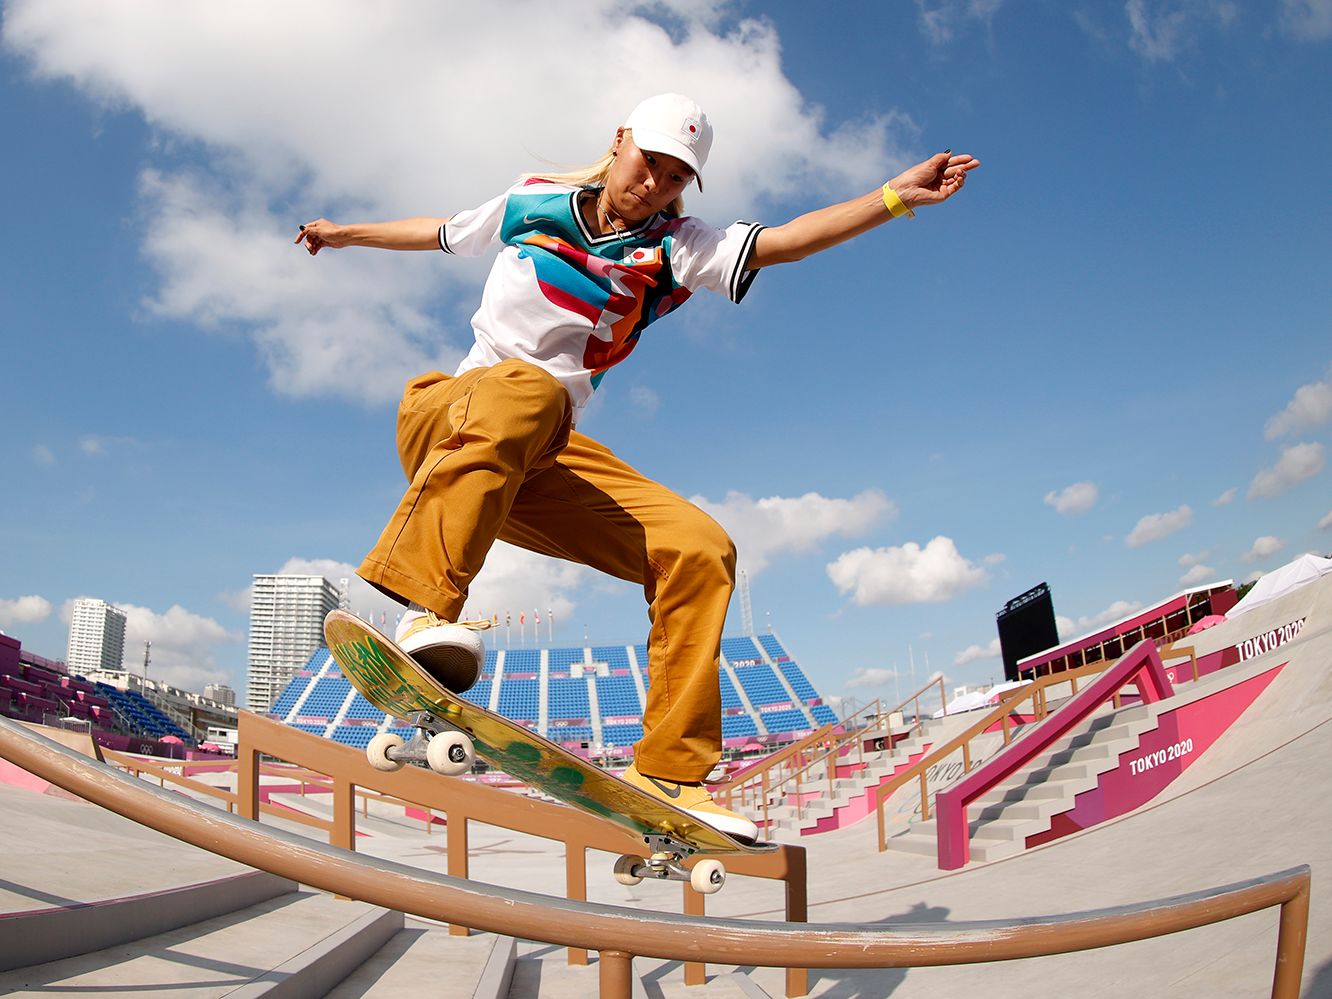 Let op Aktentas Fluisteren People in Japan thought skate culture was dangerous. Now it's going  mainstream | CNN